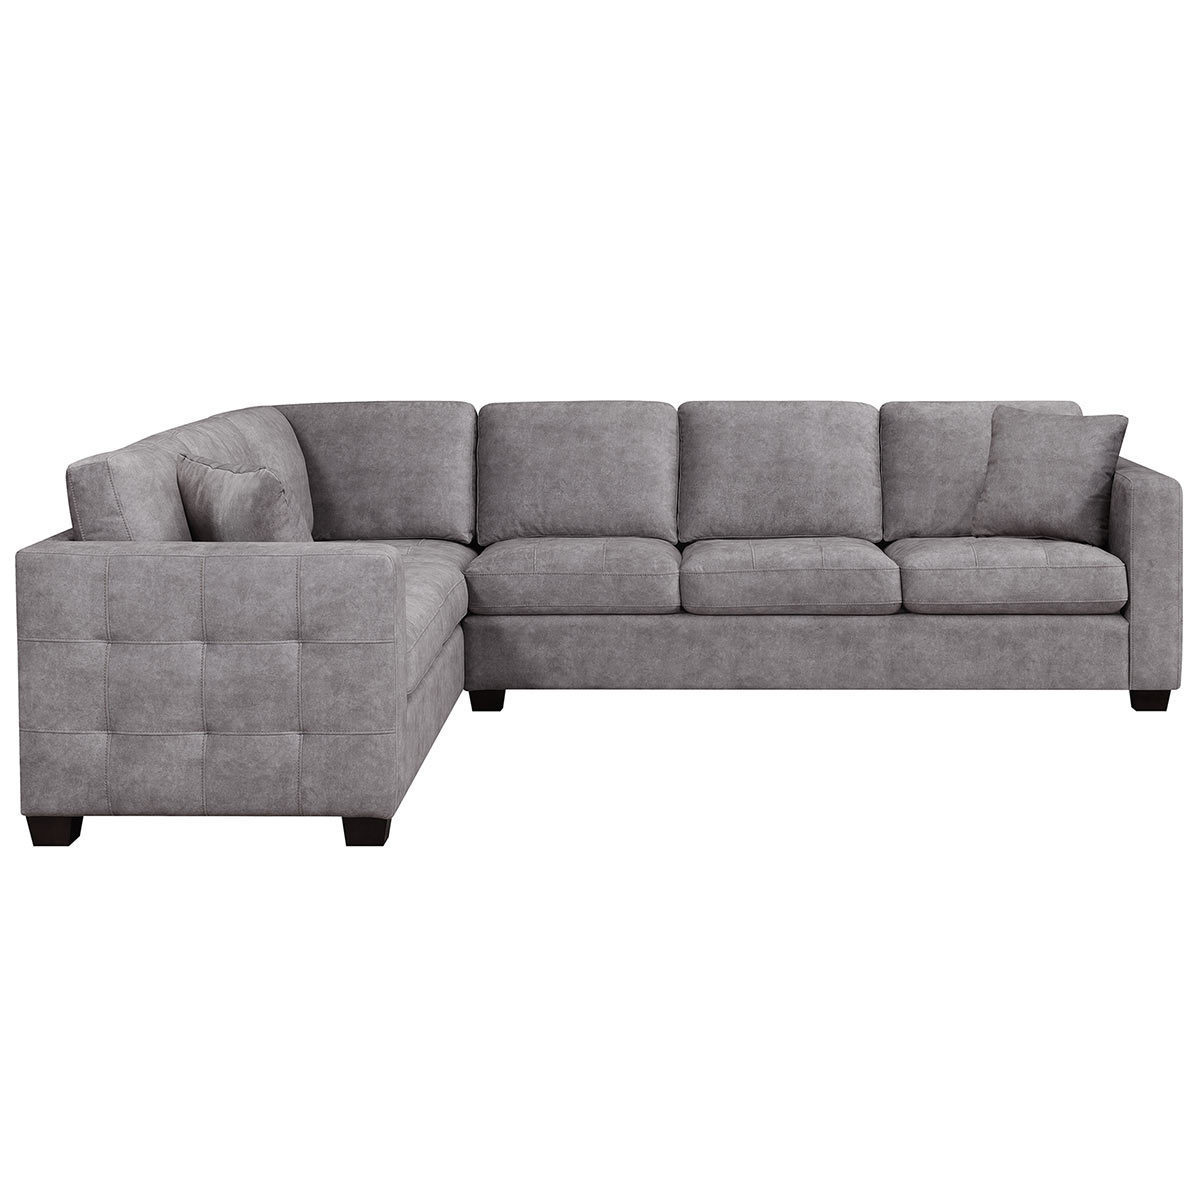 Cut out image of corner sofa side view on white background showcasing buttoned side